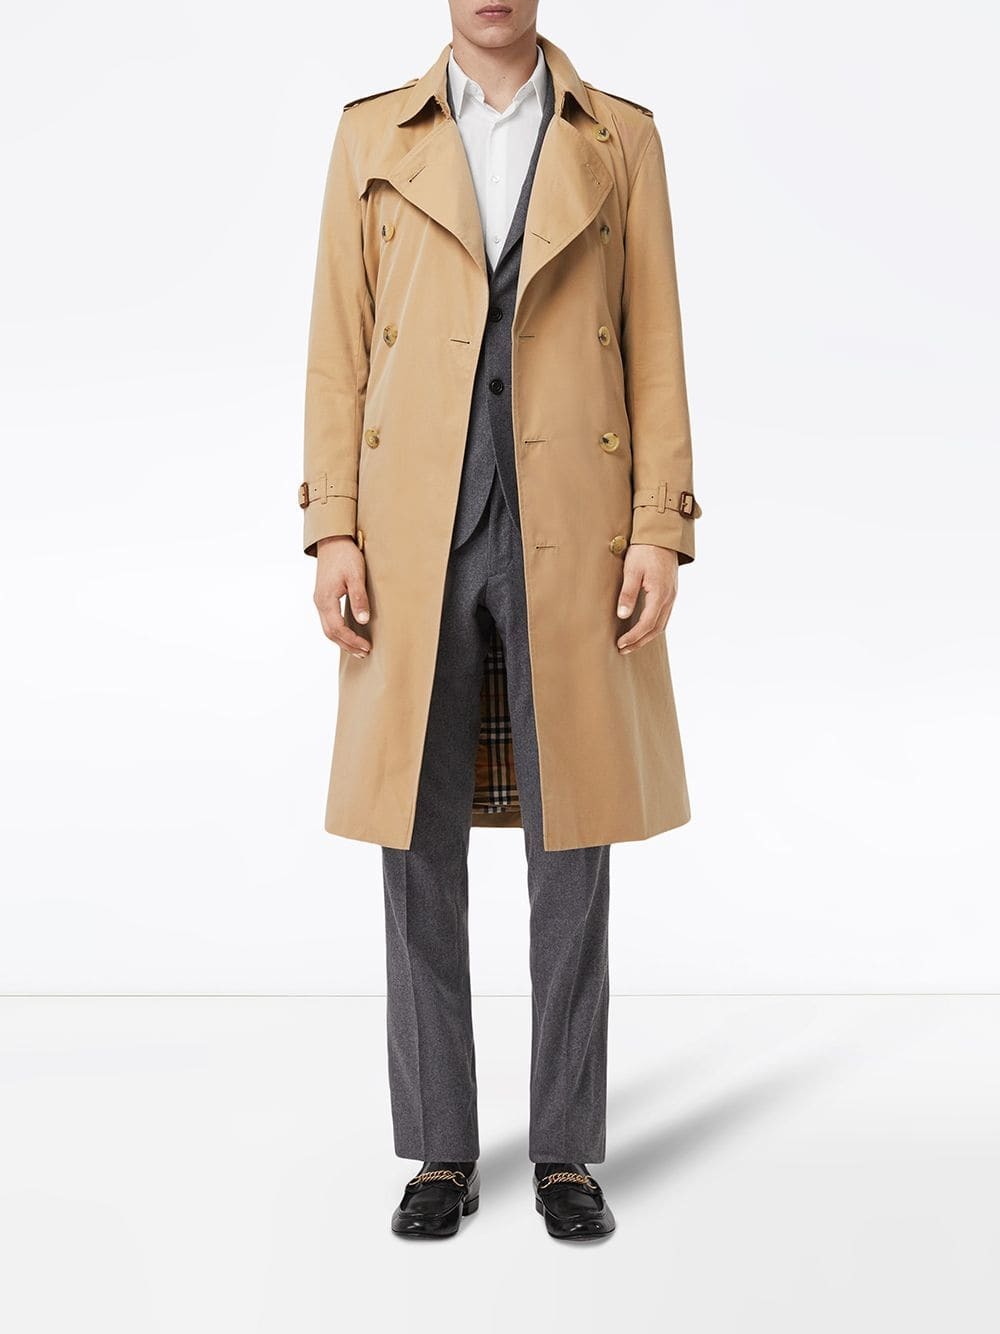 Burberry The Long Kensington Heritage Trench Coat, $2,490 | farfetch ...